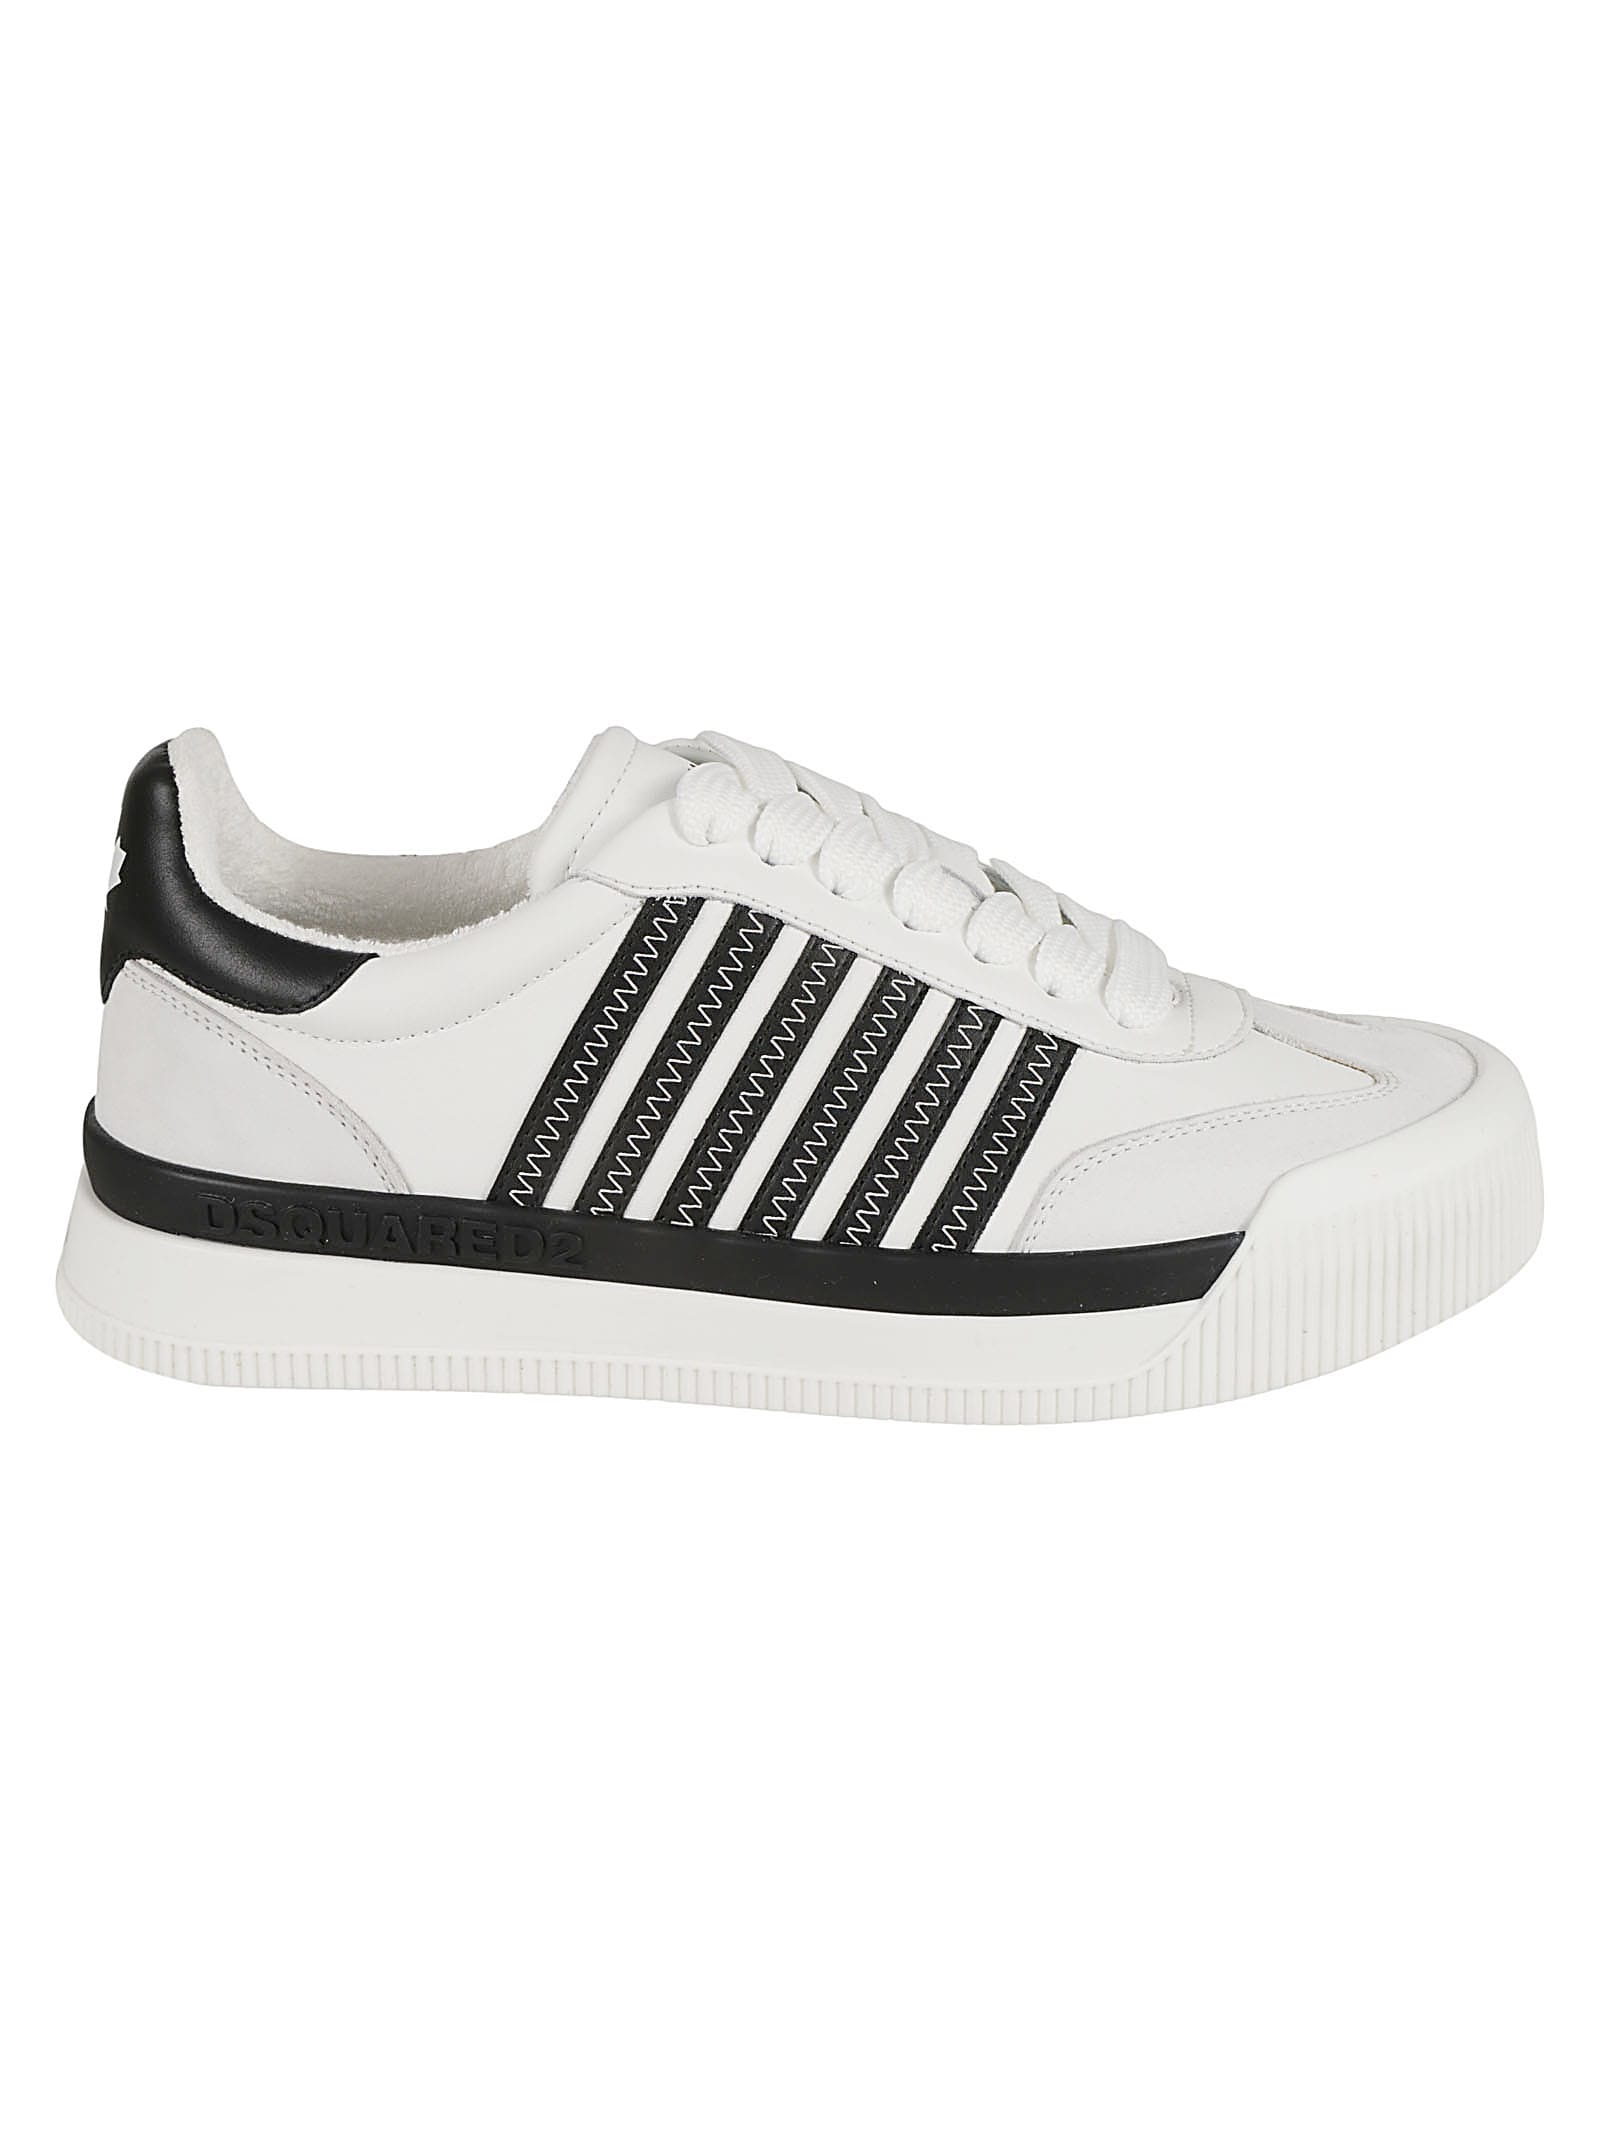 Shop Dsquared2 New Jersey Sneakers In White/black